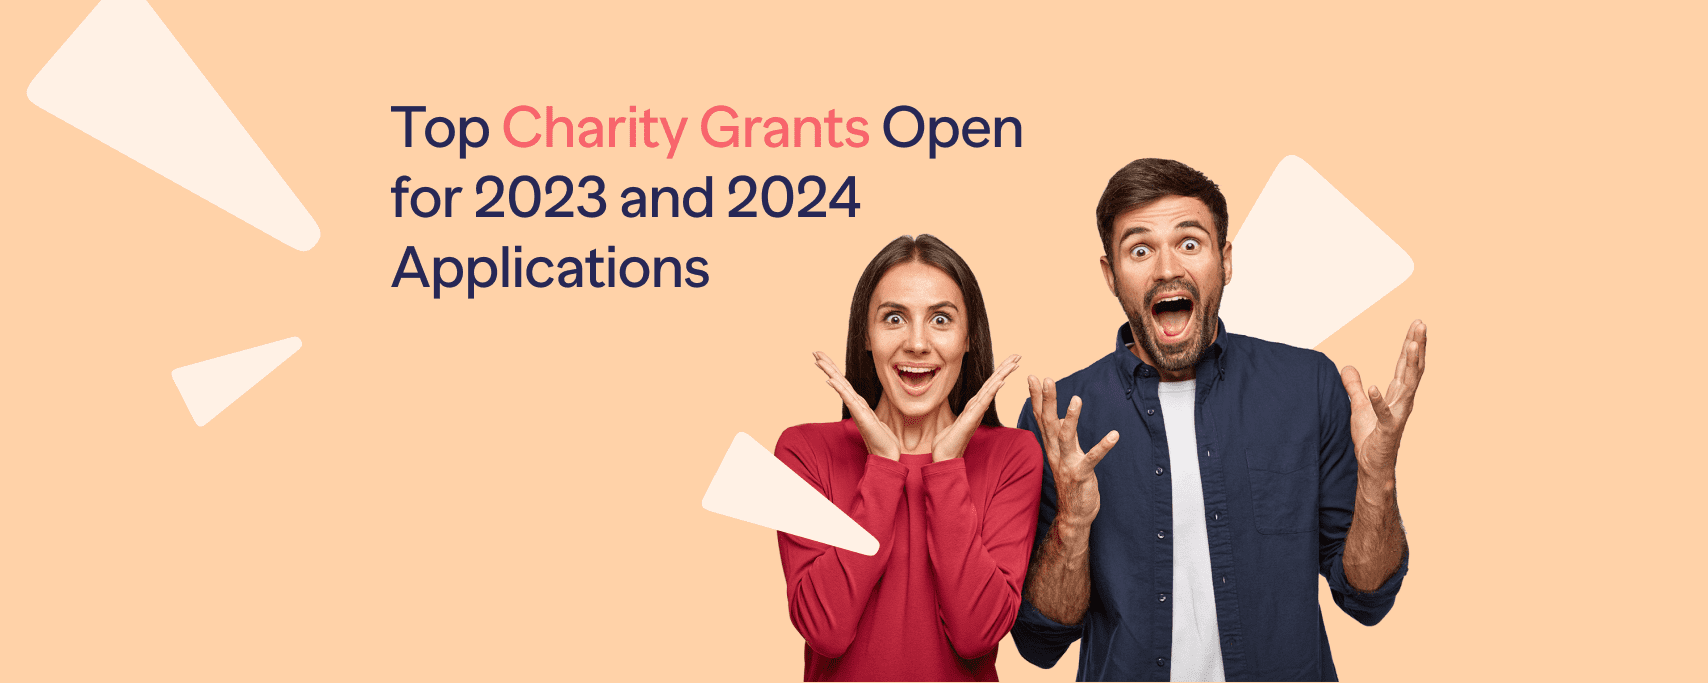 Top Charity Grants Open For 2023 And 2024 Applications 